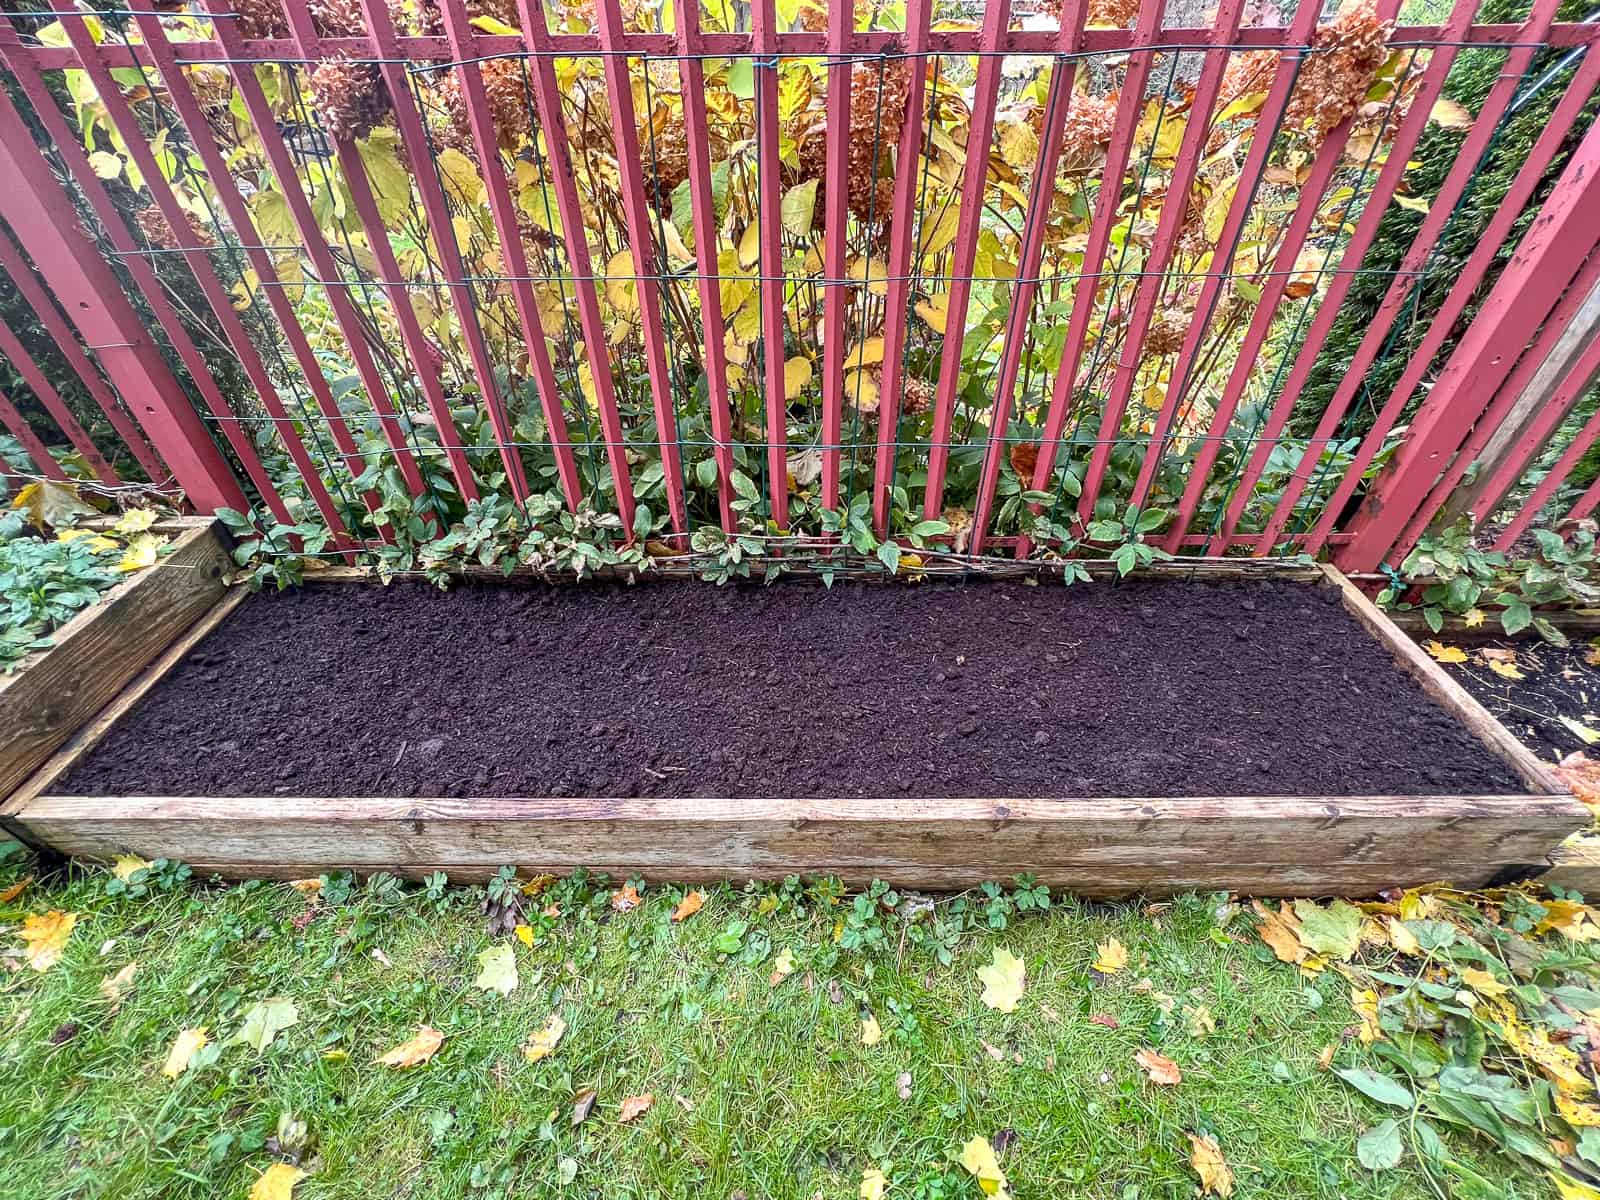 A gloriously tidy and clean raised bed, filled with nutrient rich soil, and ready to start spring plantings